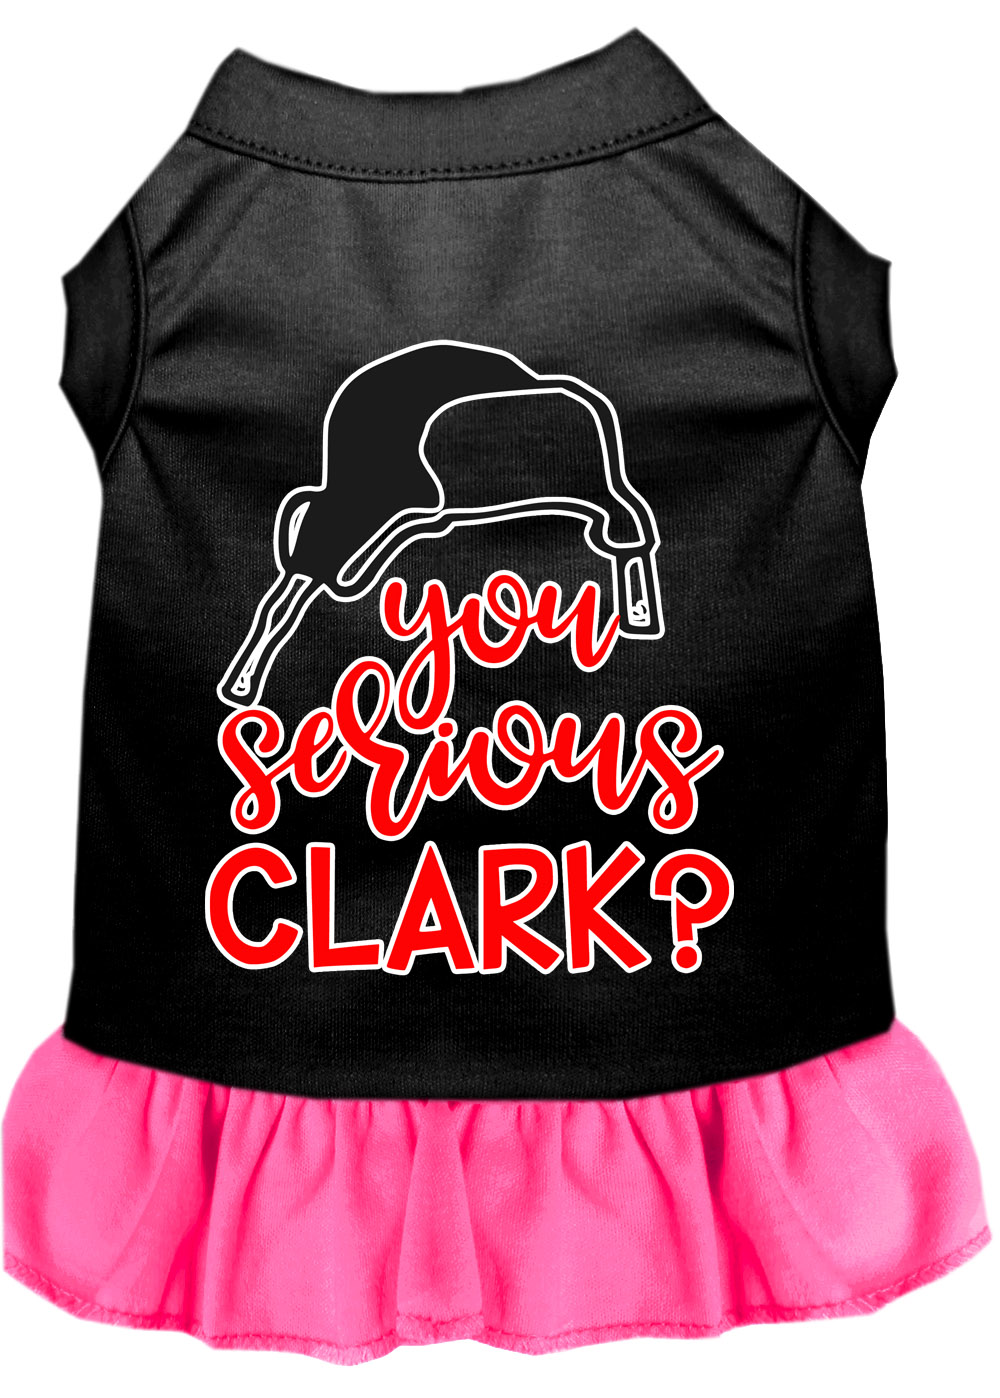 You Serious Clark? Screen Print Dog Dress Black with Bright Pink Lg